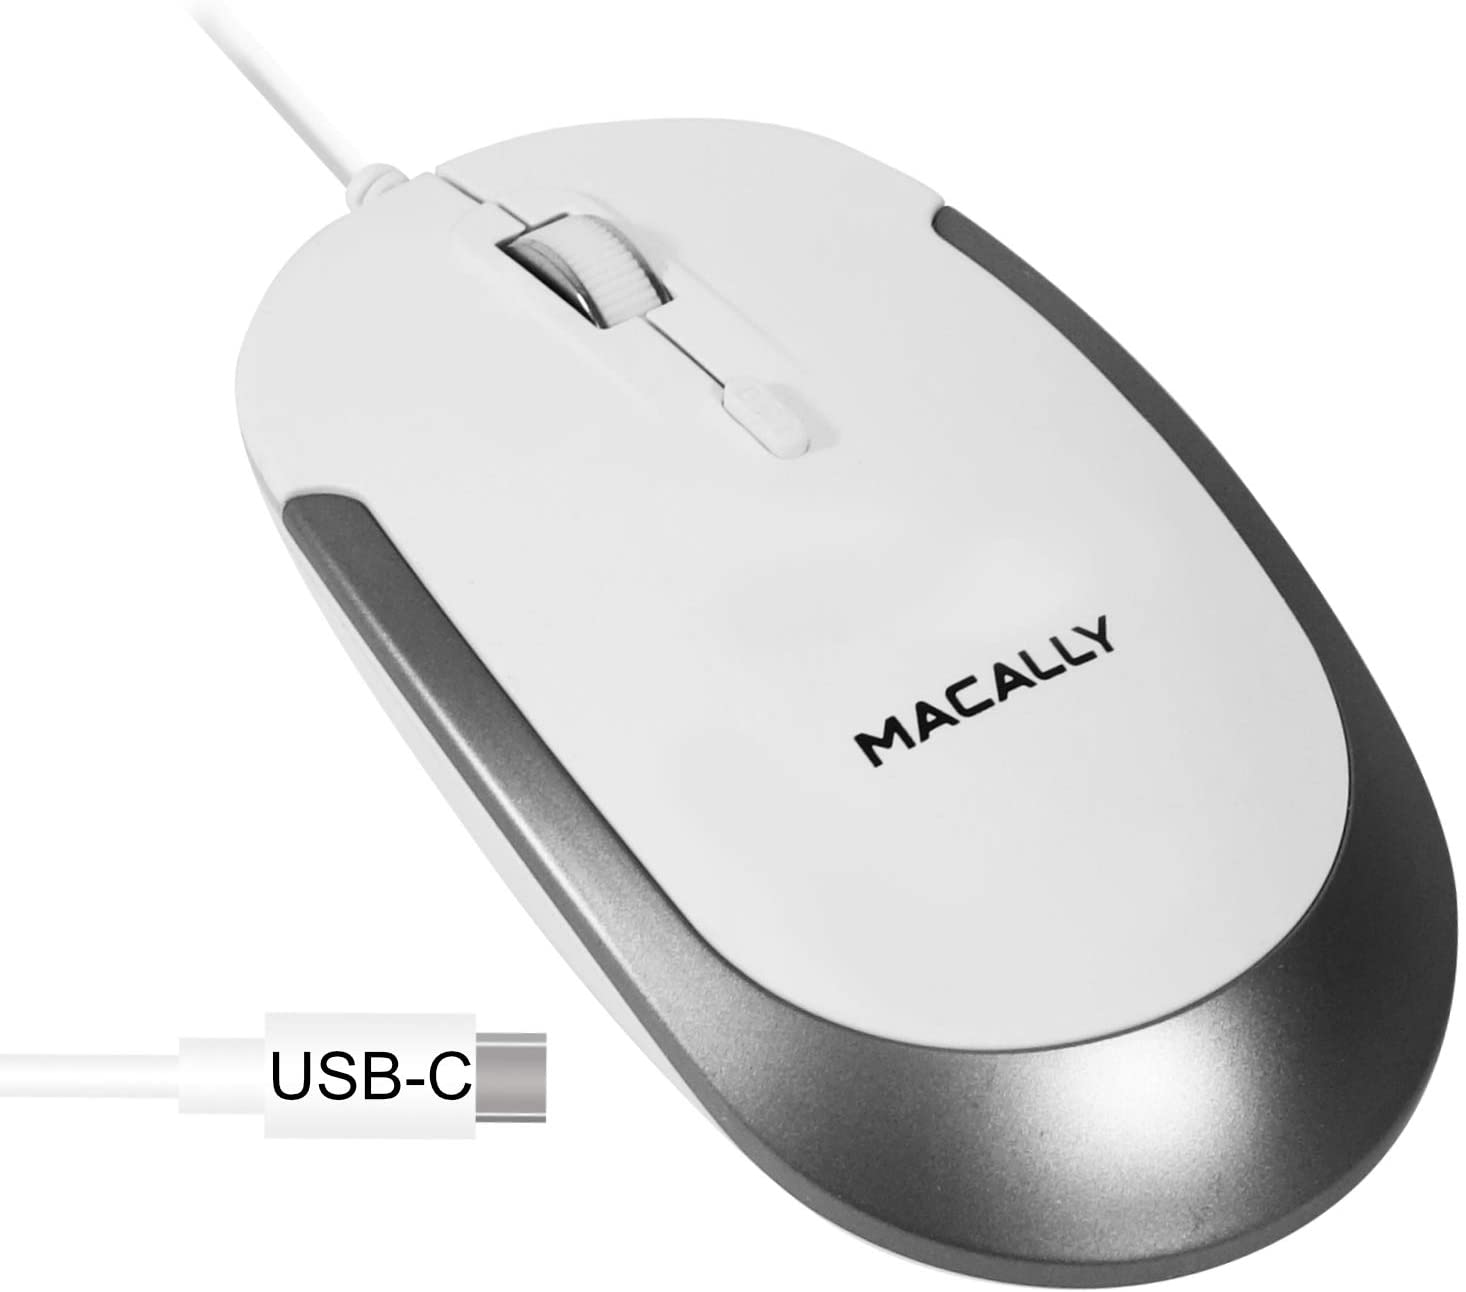 Macally Wired USB C Mouse